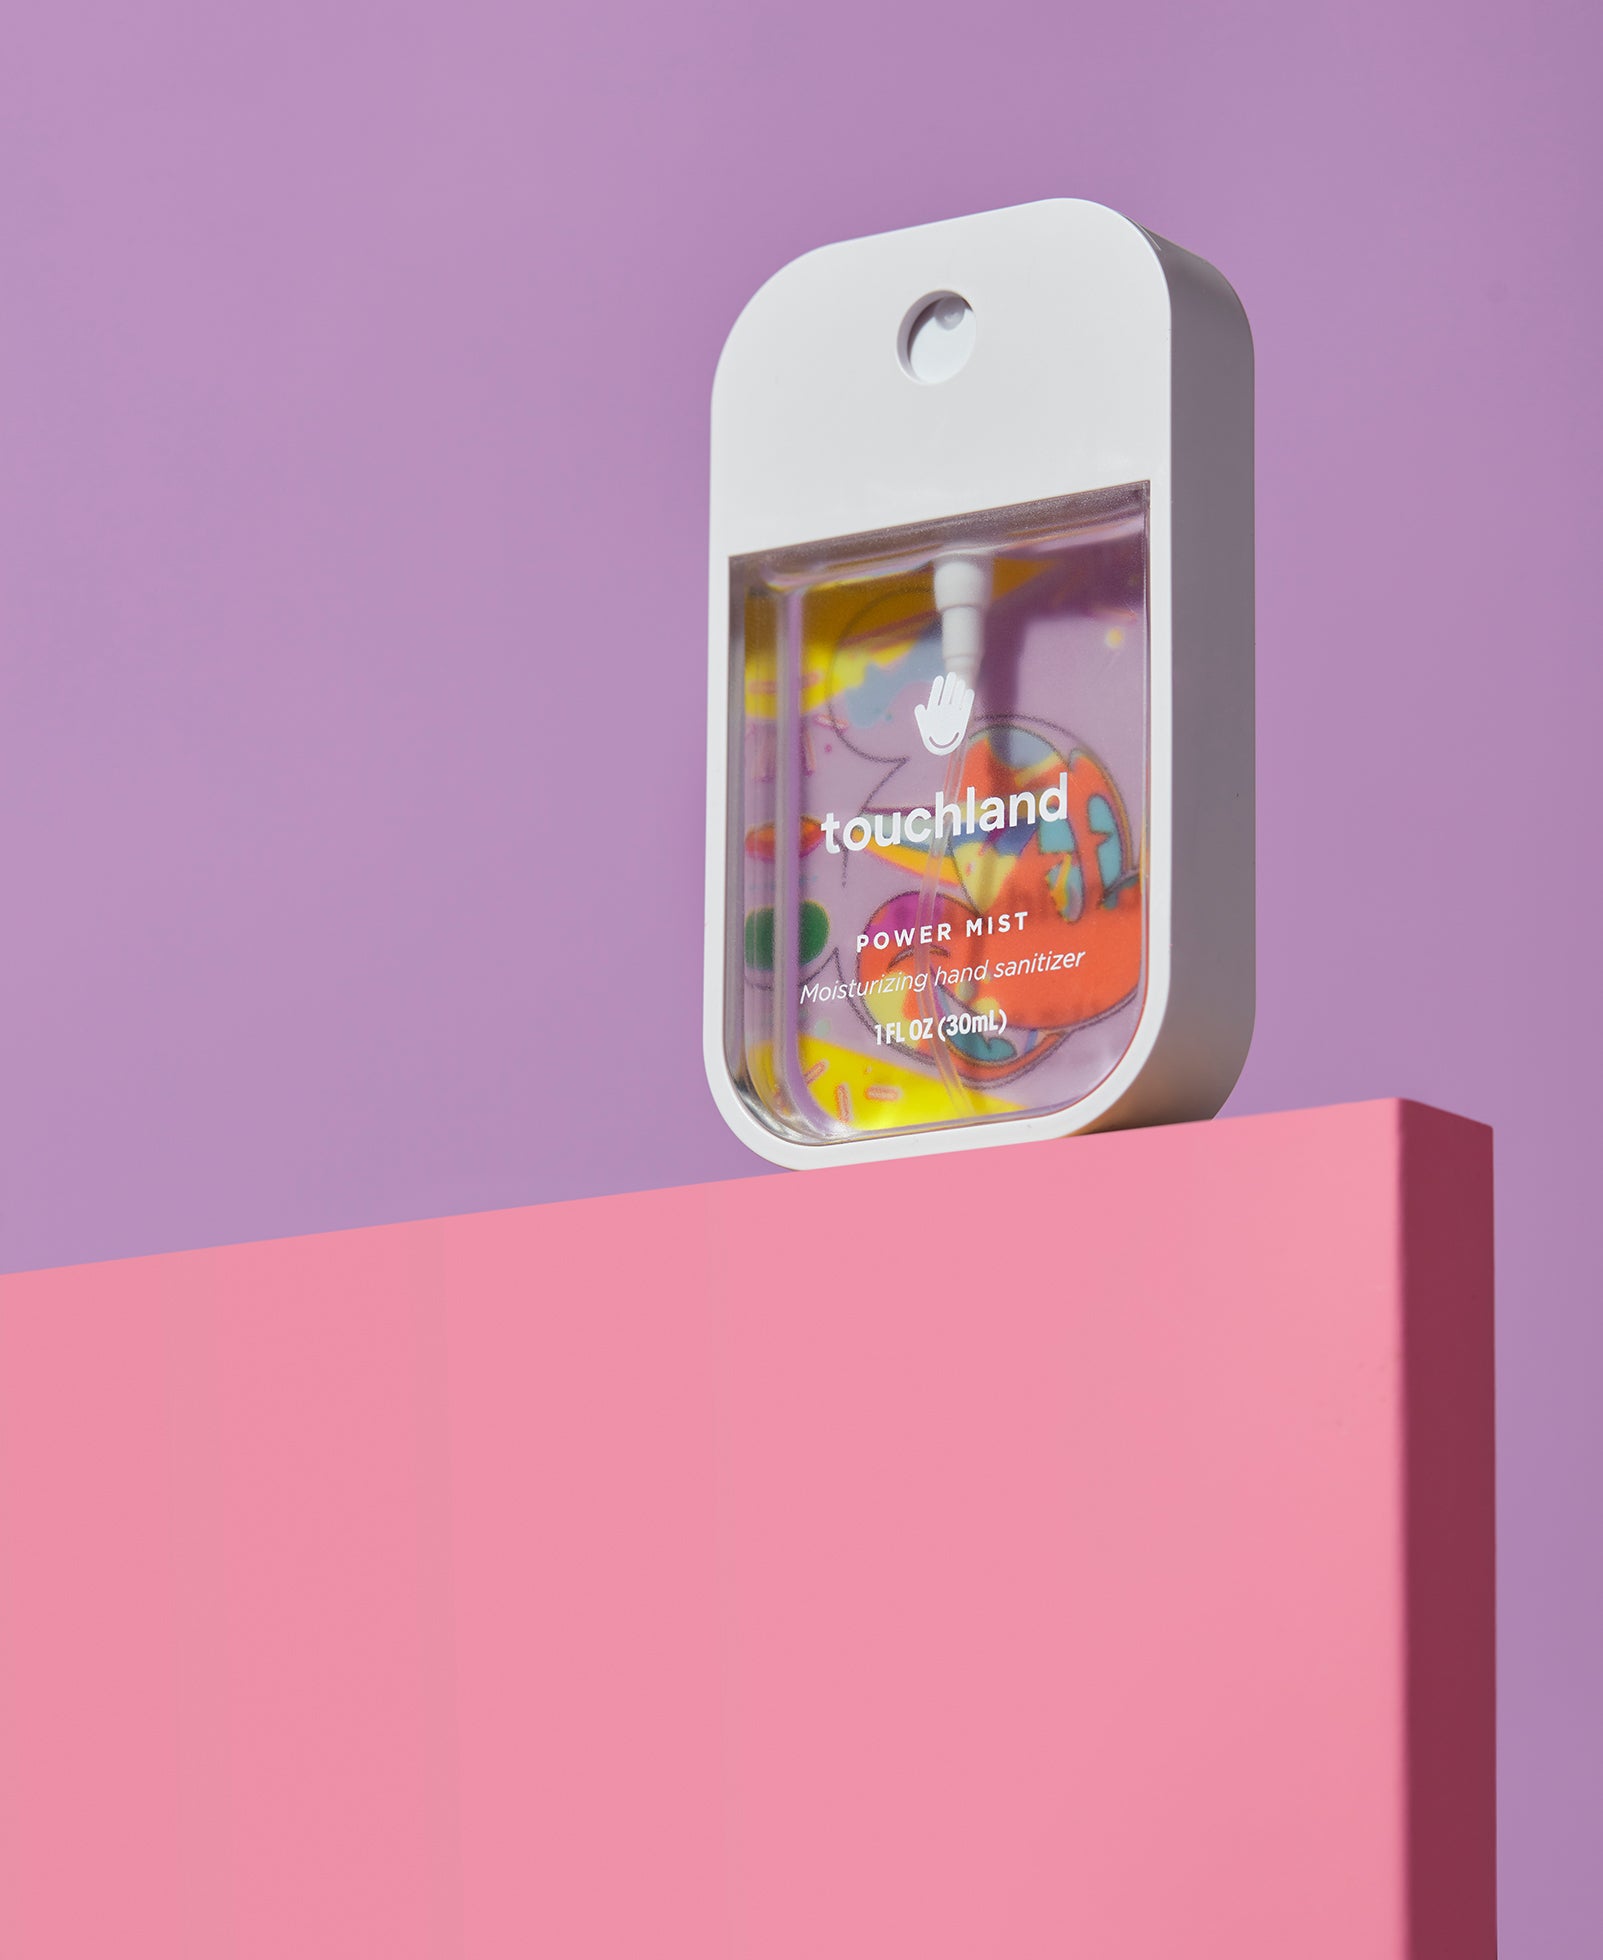 Touchland x disney collection in packaging against purple wall on pink block